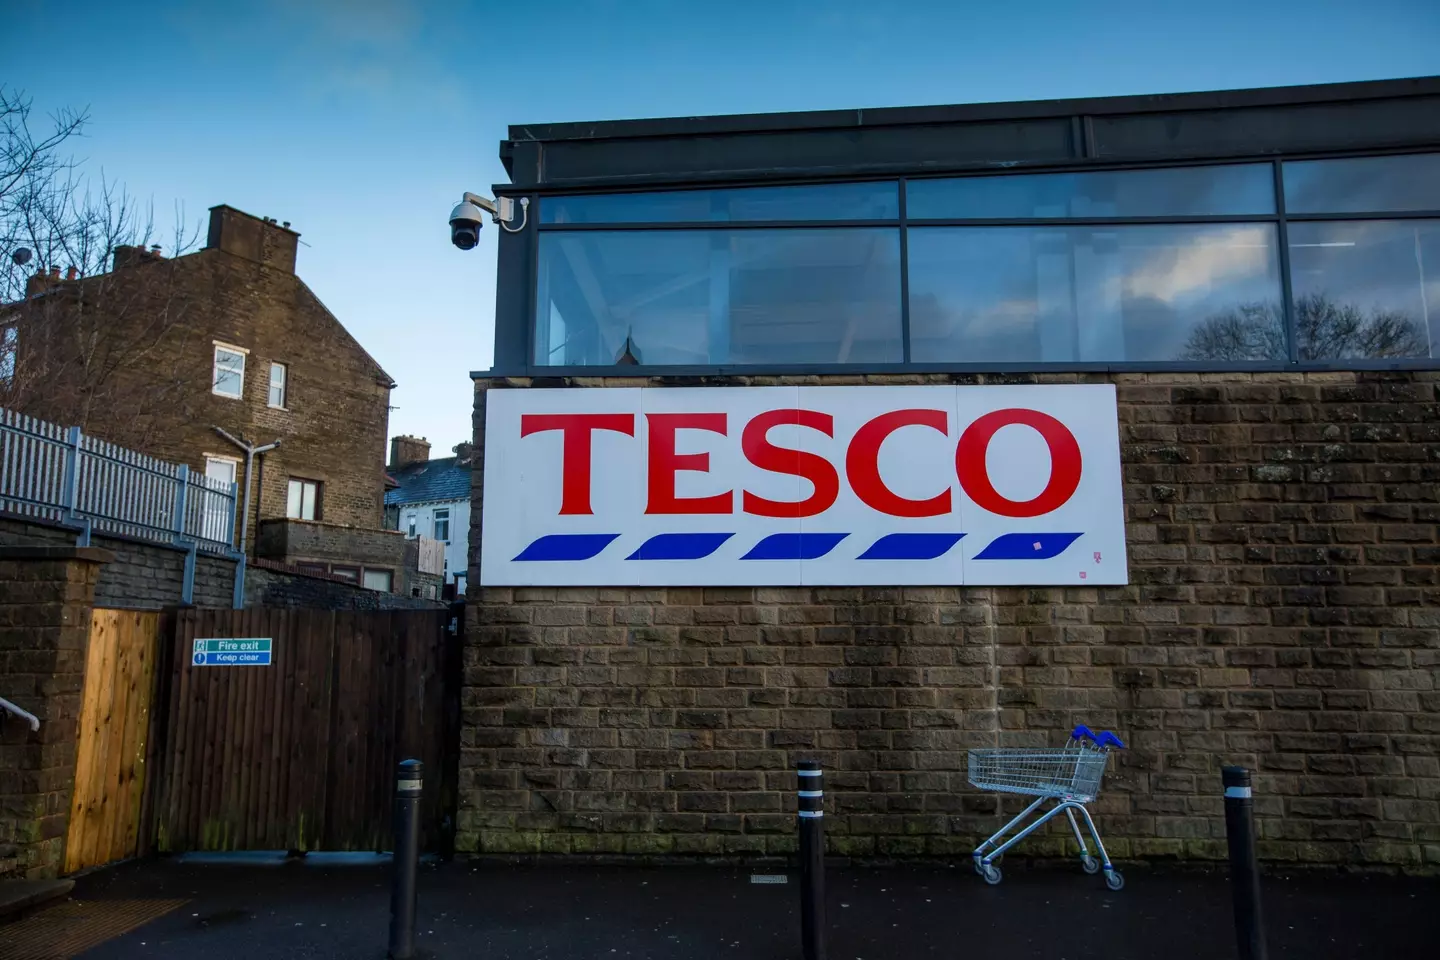 Tesco has followed other supermarkets in stopping sale of Russian products.